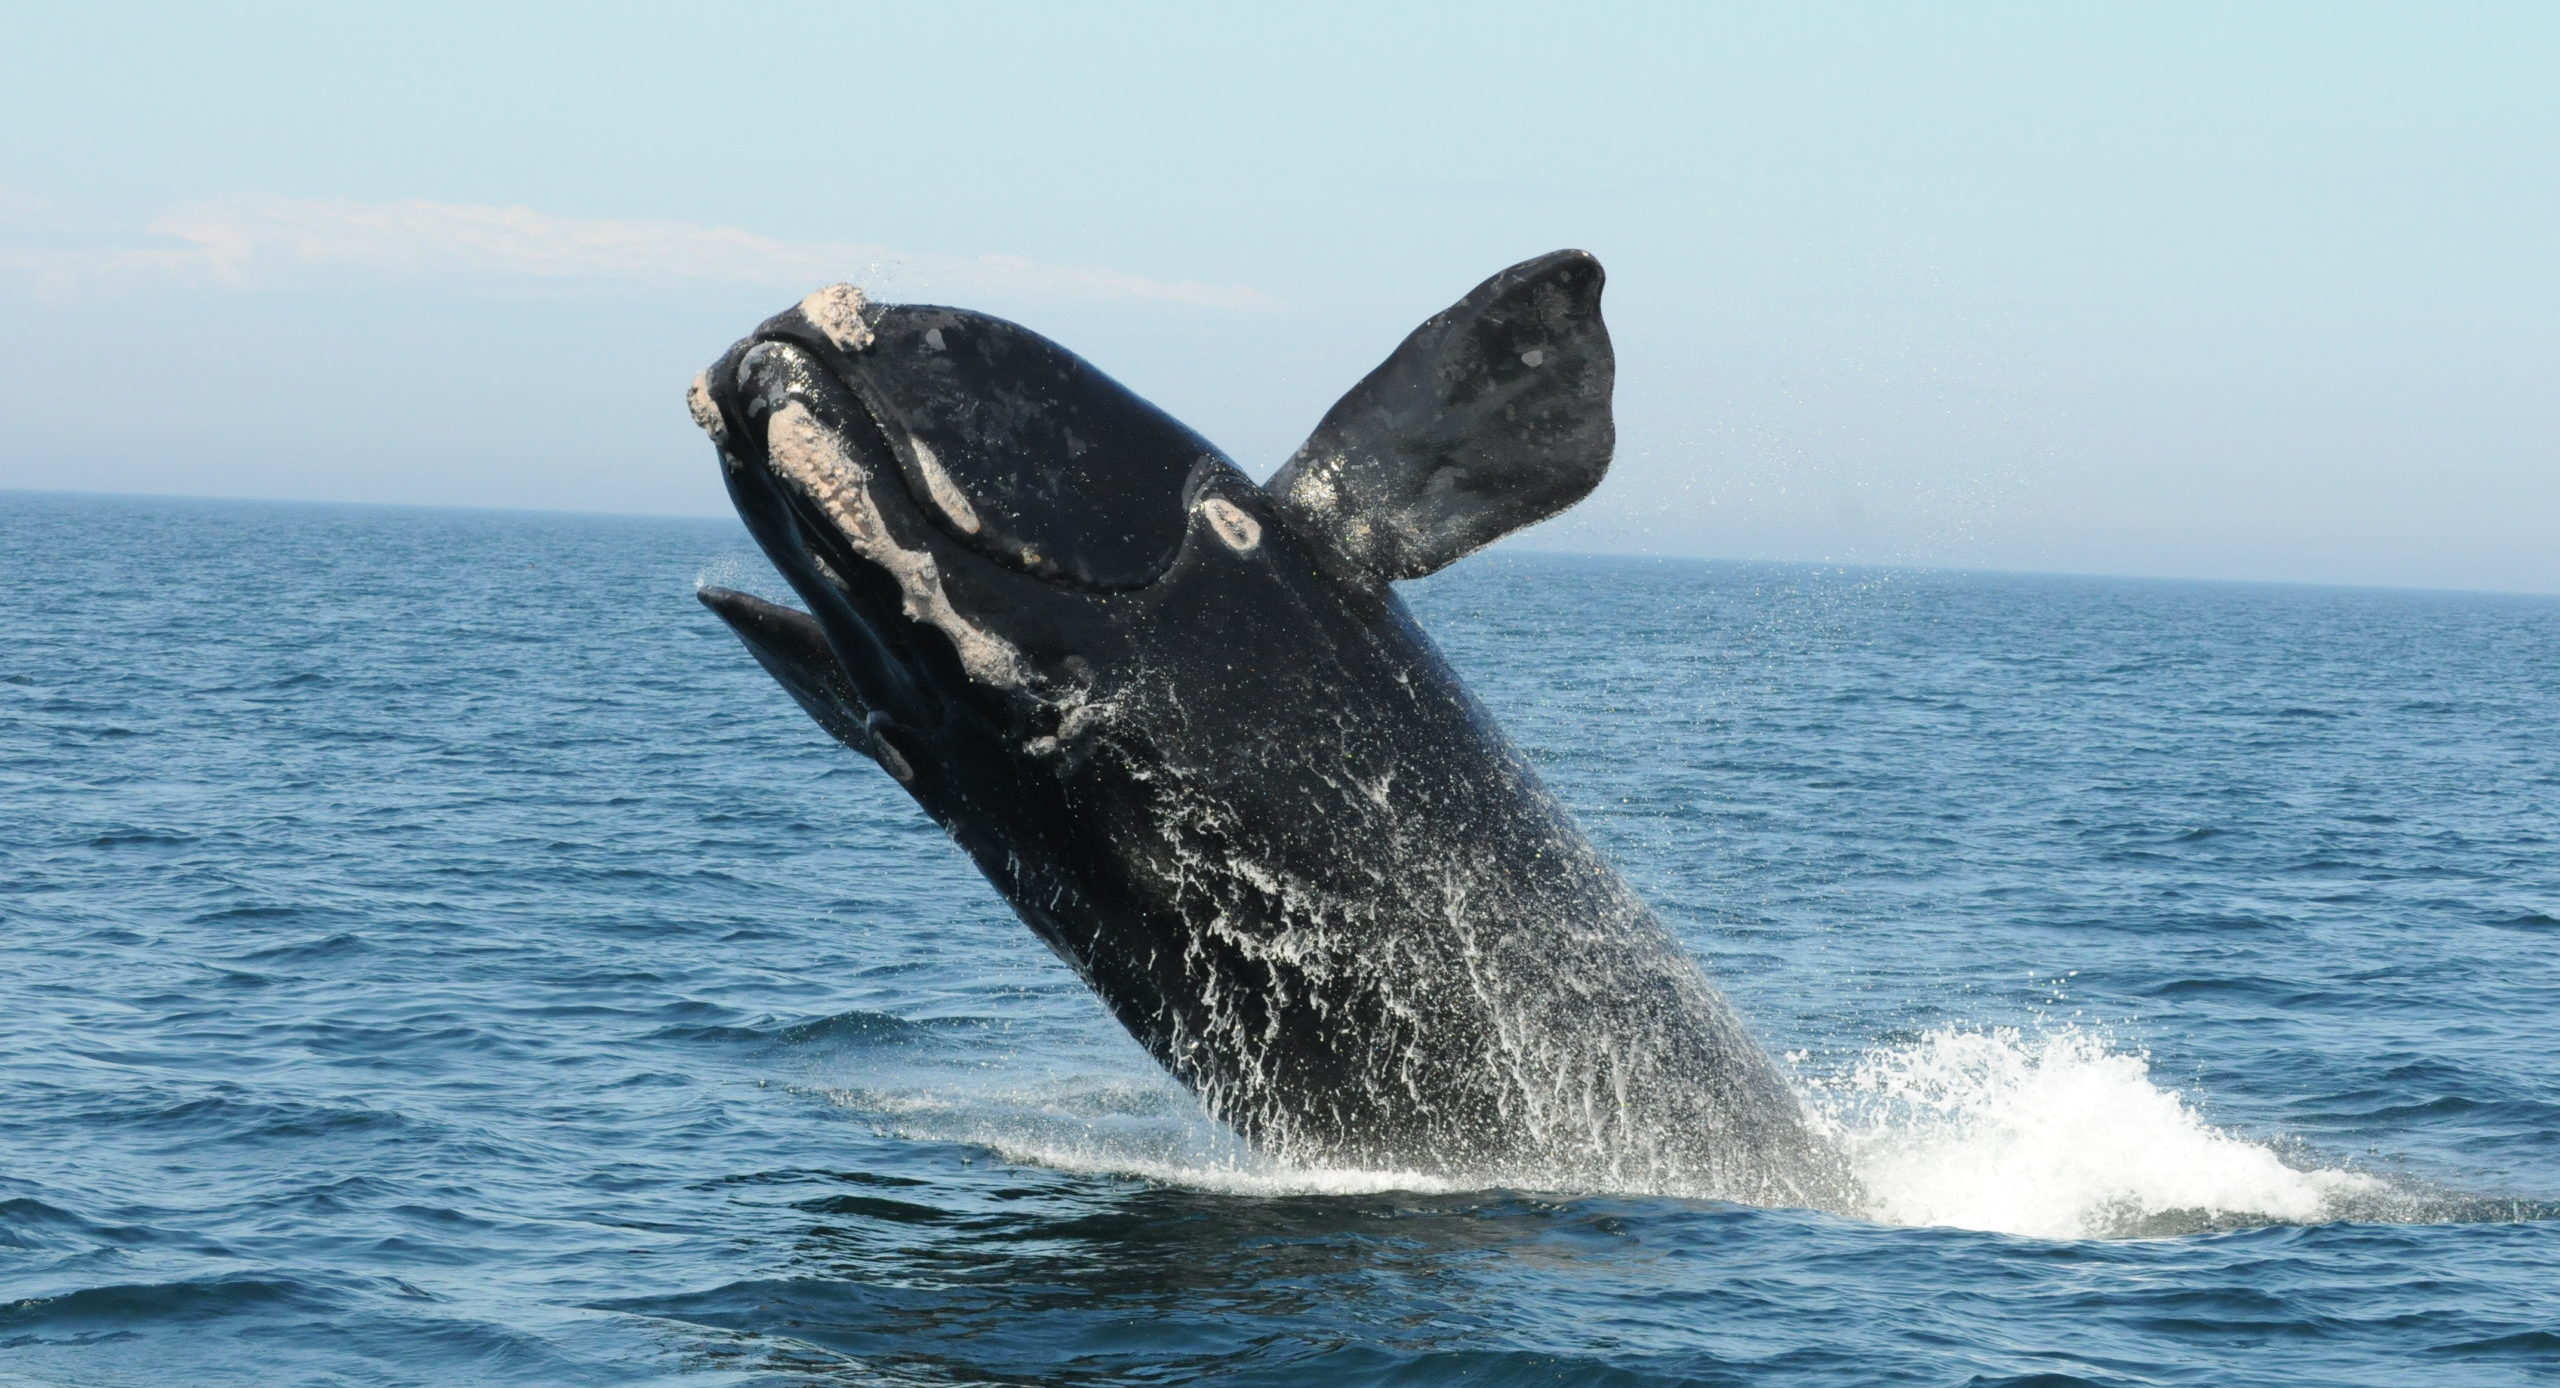 Right whale breaching